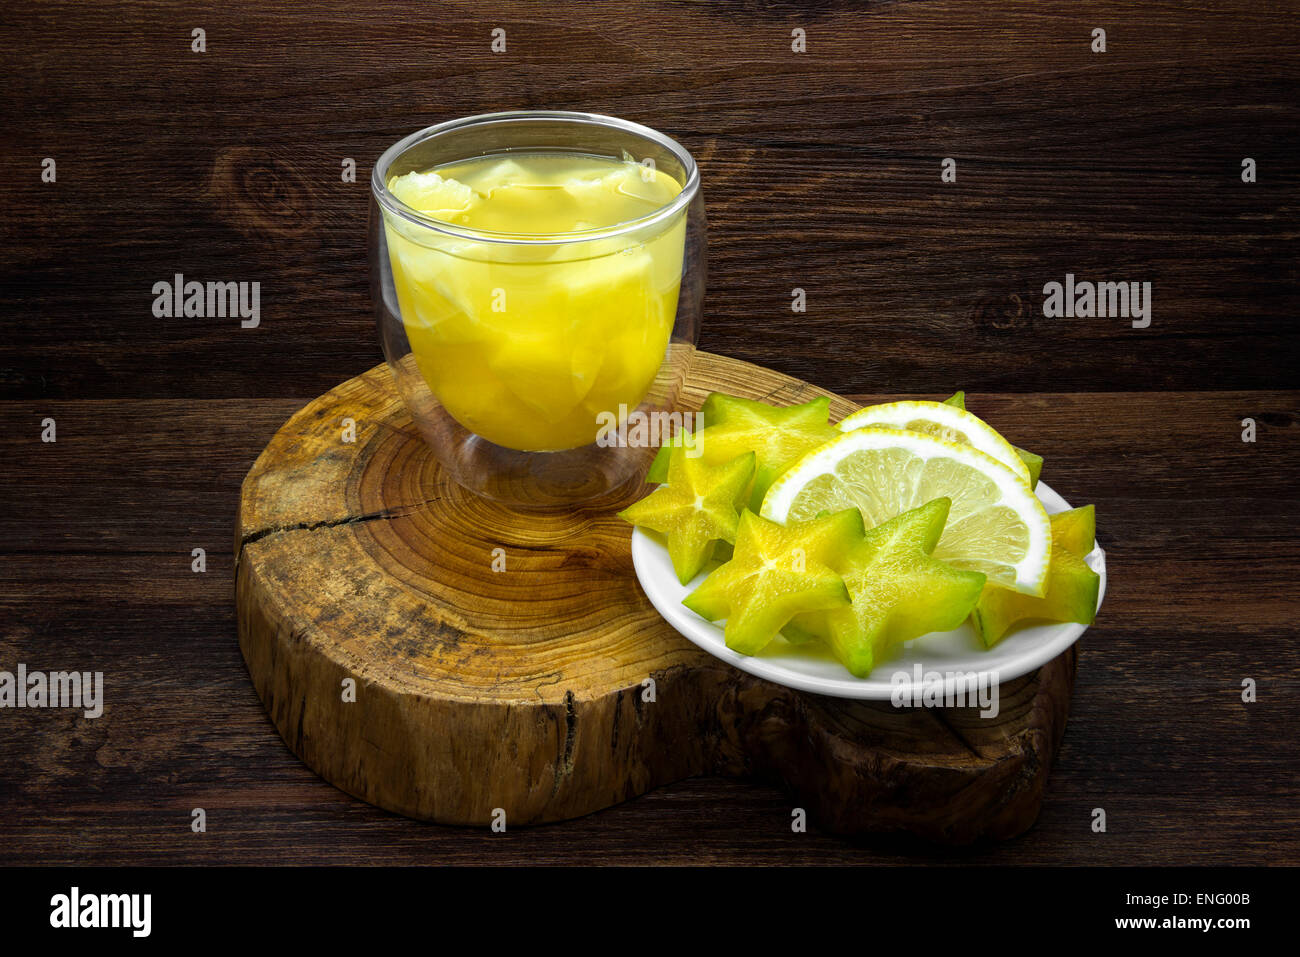 Pineapple juice and lemon with star fruit on a wooden background. Stock Photo